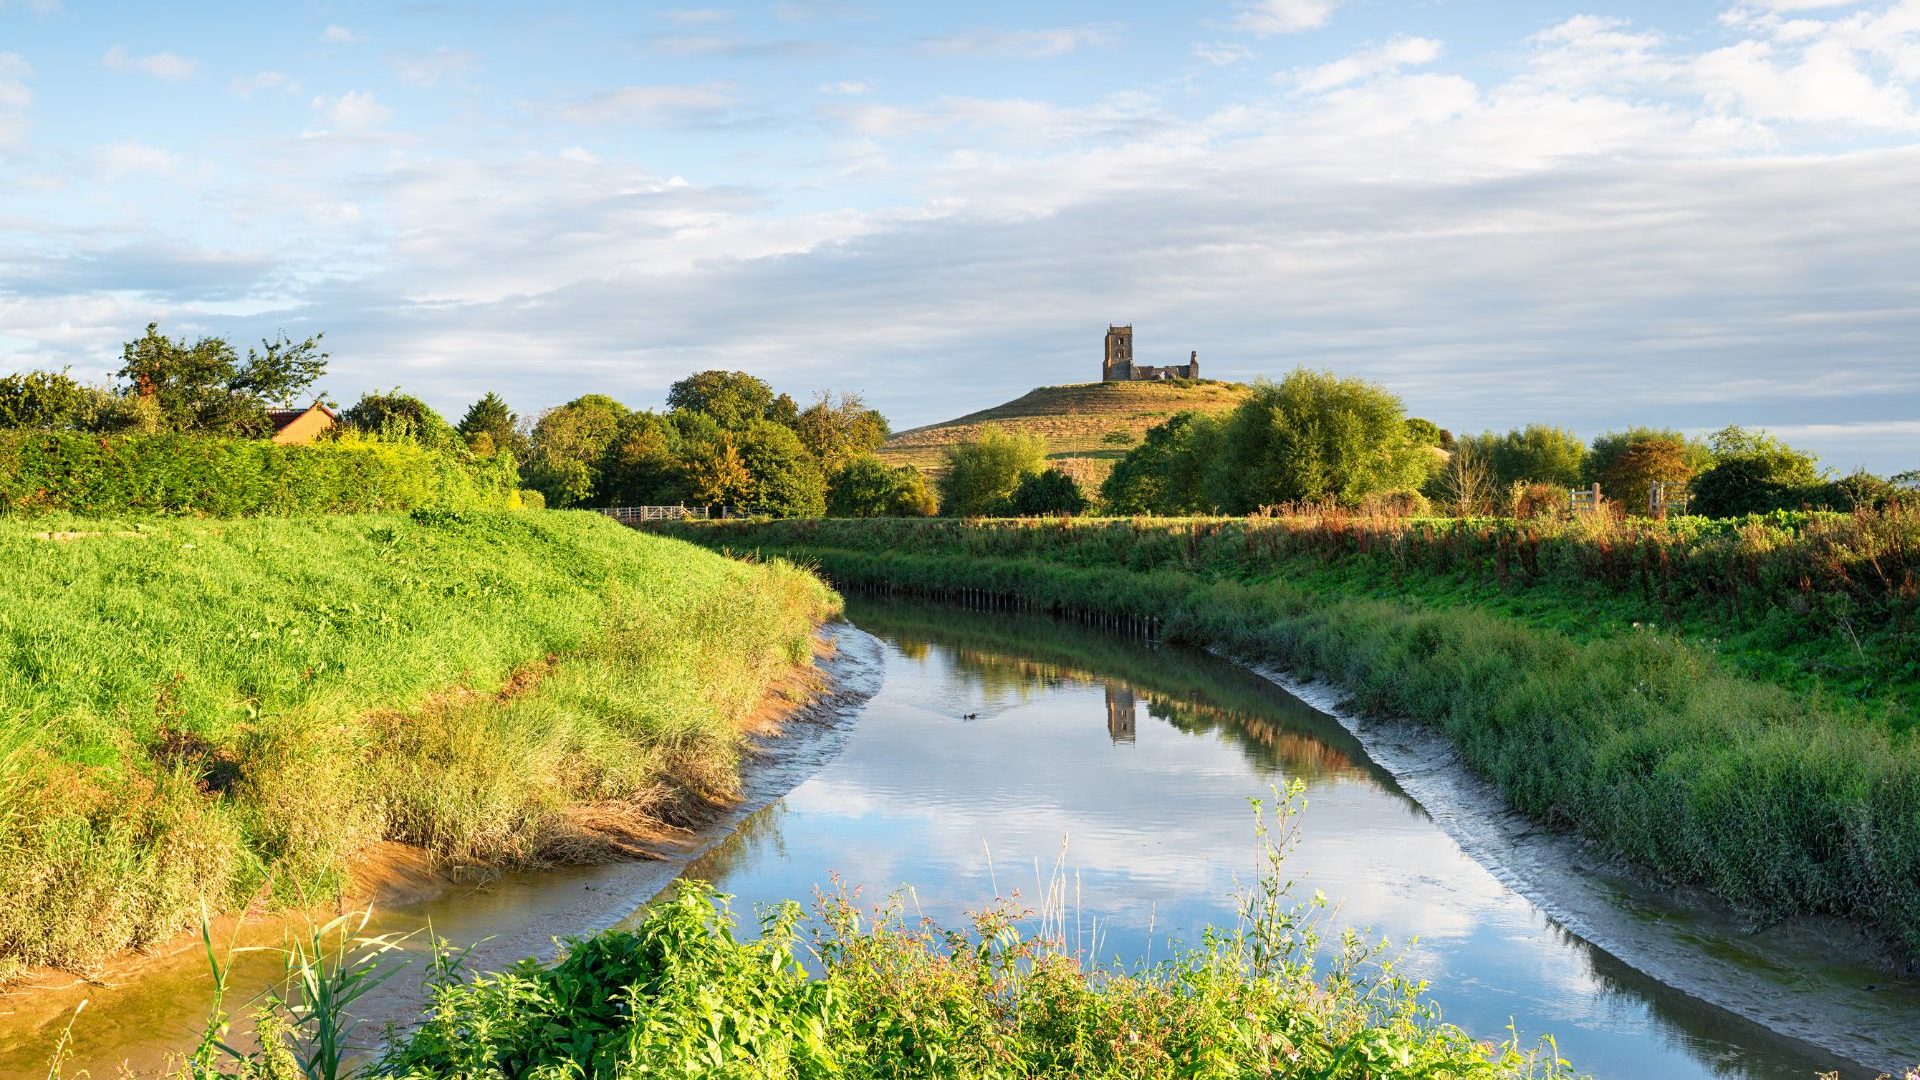 Flat ground of the Somerset Levels wetlands with Burrow Mump hill with monument on it in the distance